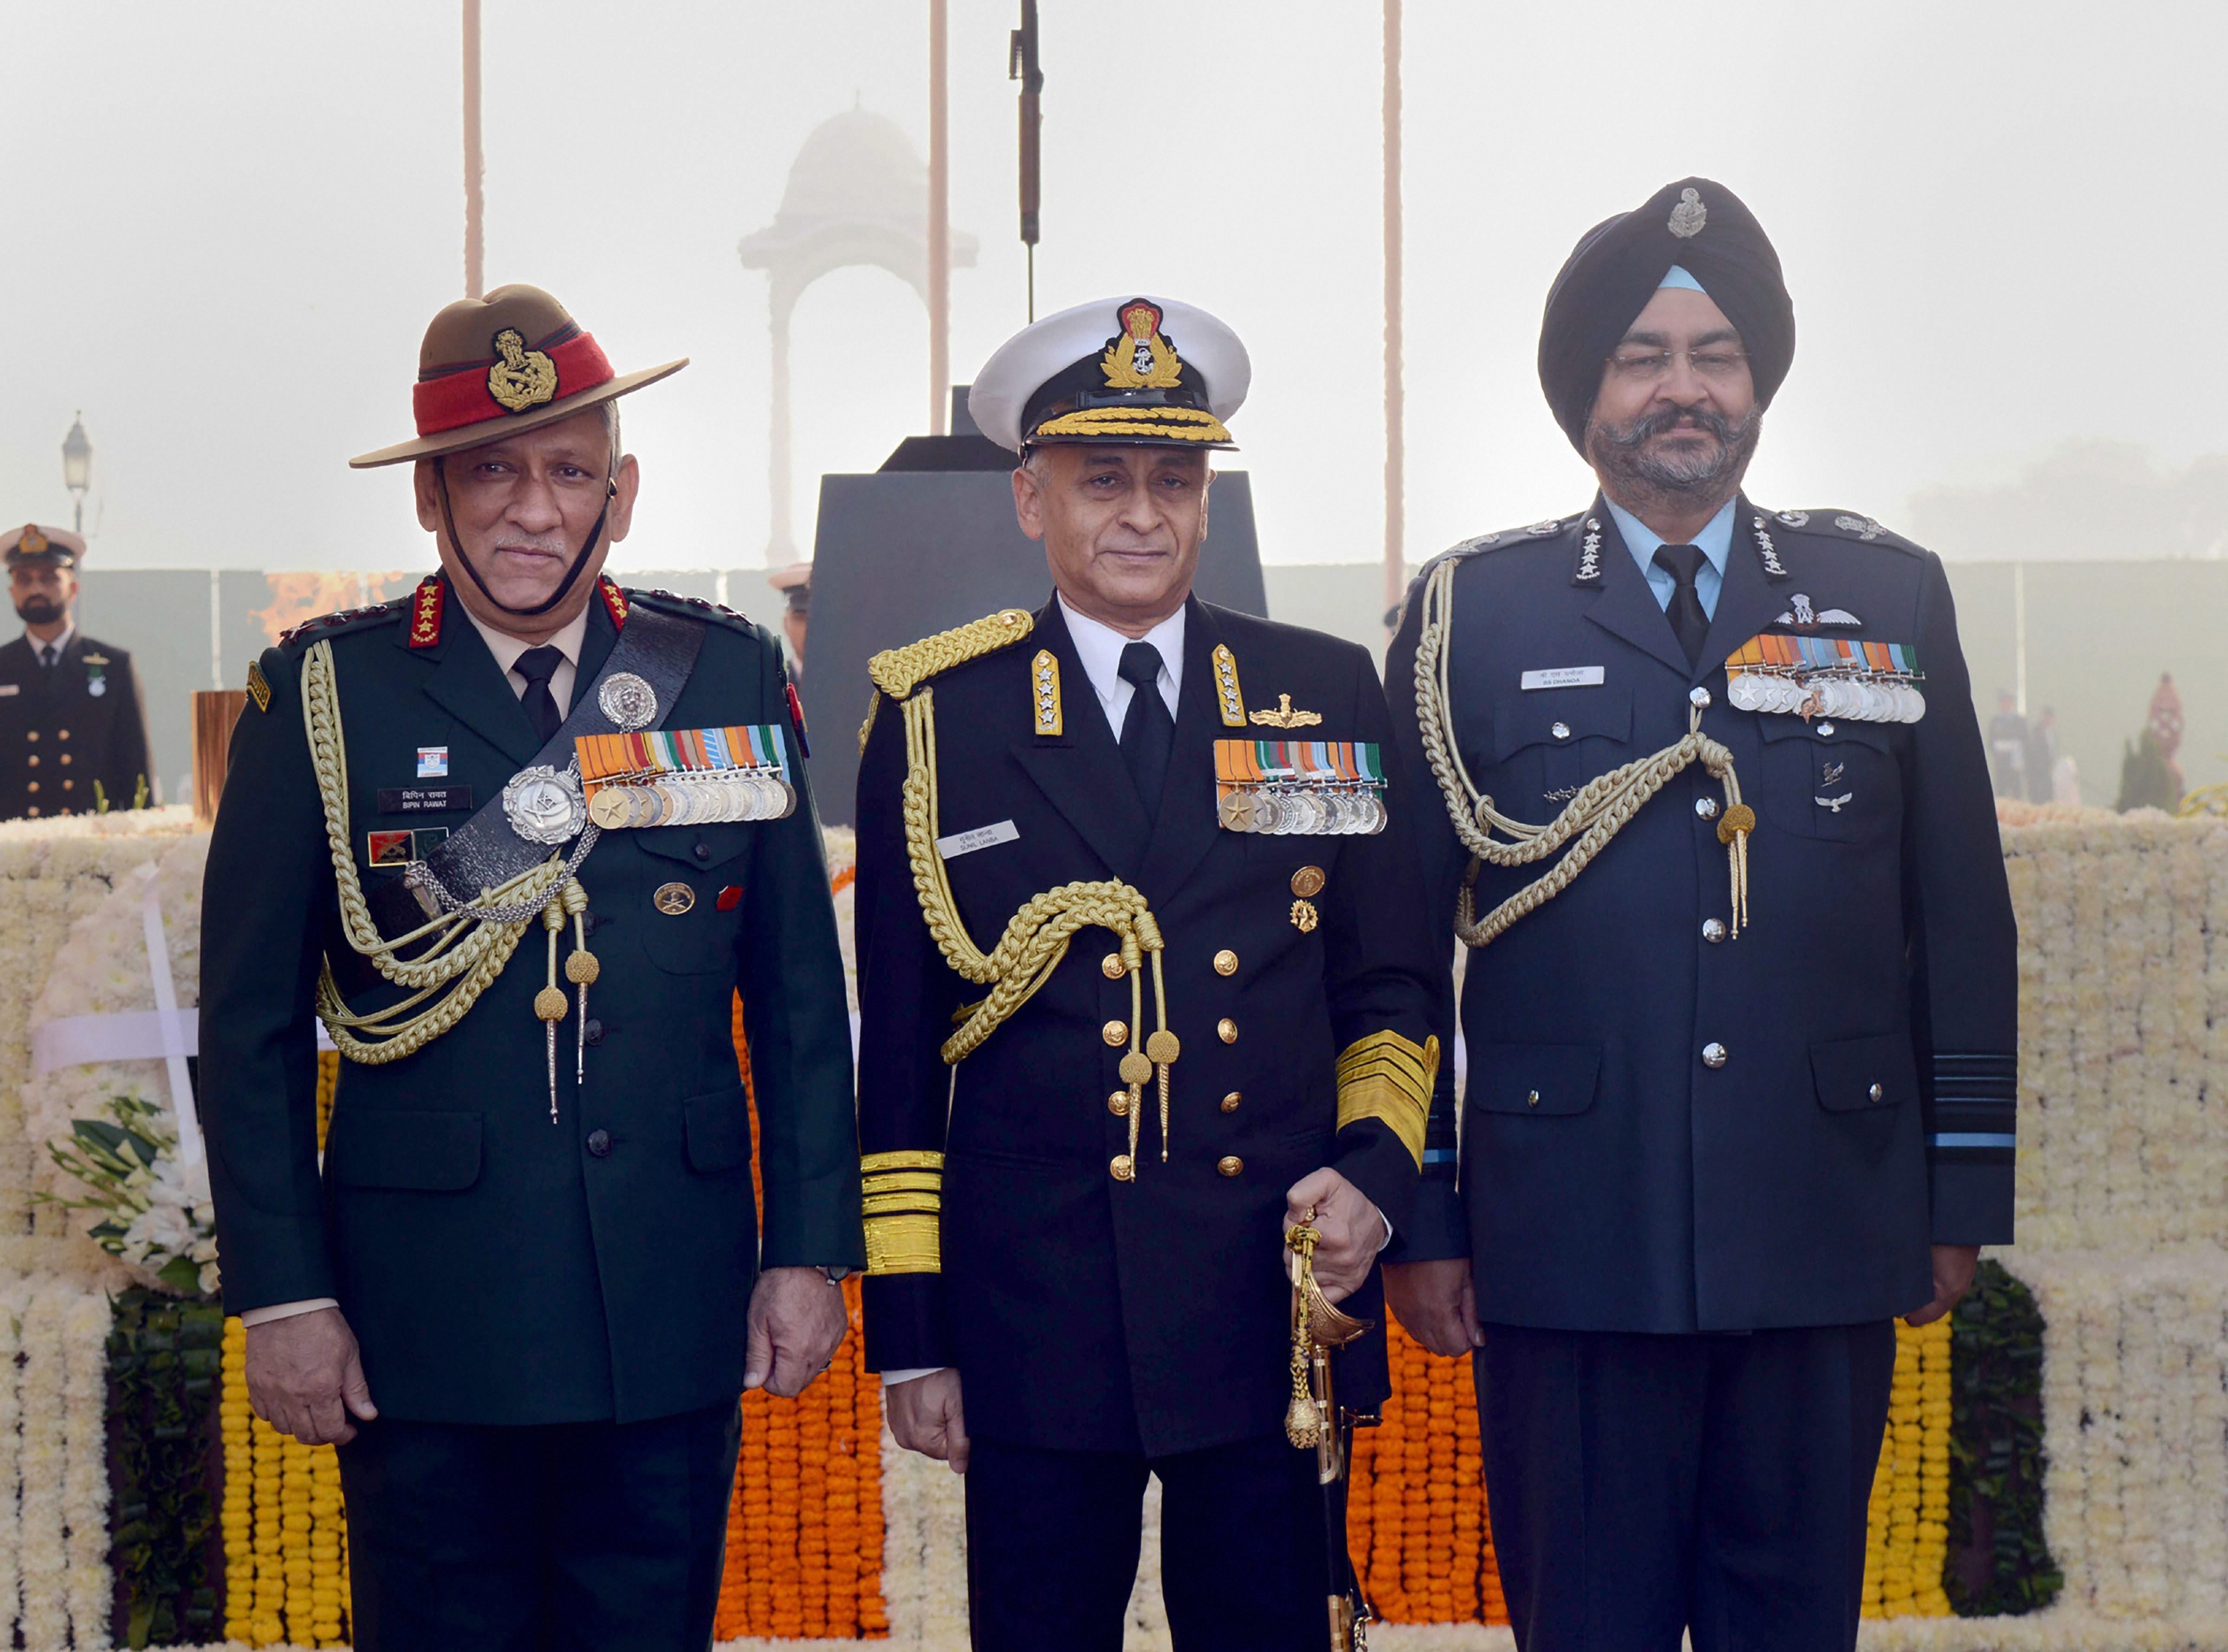 Chief of Army Staff General Bipin Rawat, Chief of Naval Staff Admiral Sunil Lanba and Chief of Air Staff Air Chief Marshal BS Dhanoa on the occasion of Navy Day at Amar Jawan Jyoti, India Gate, in New Delhi - PTI